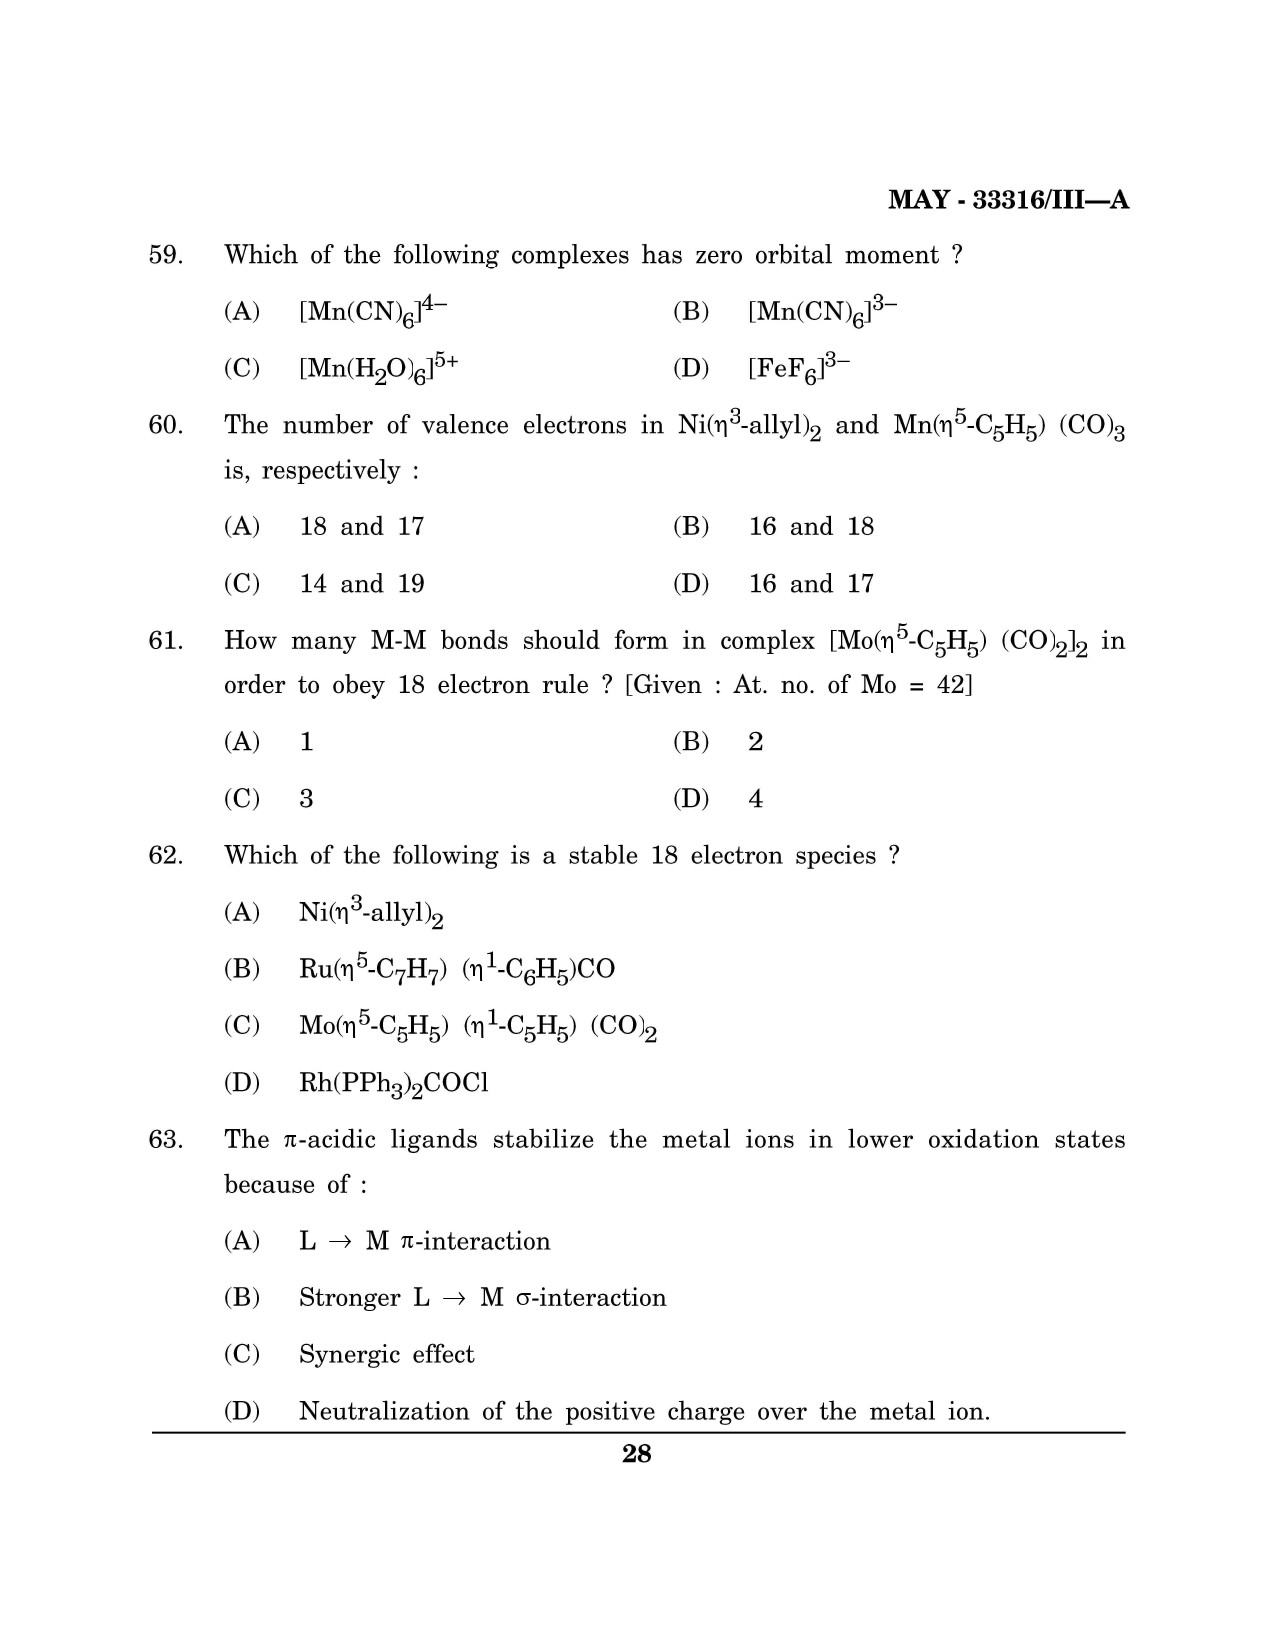 Maharashtra SET Chemical Sciences Question Paper III May 2016 27